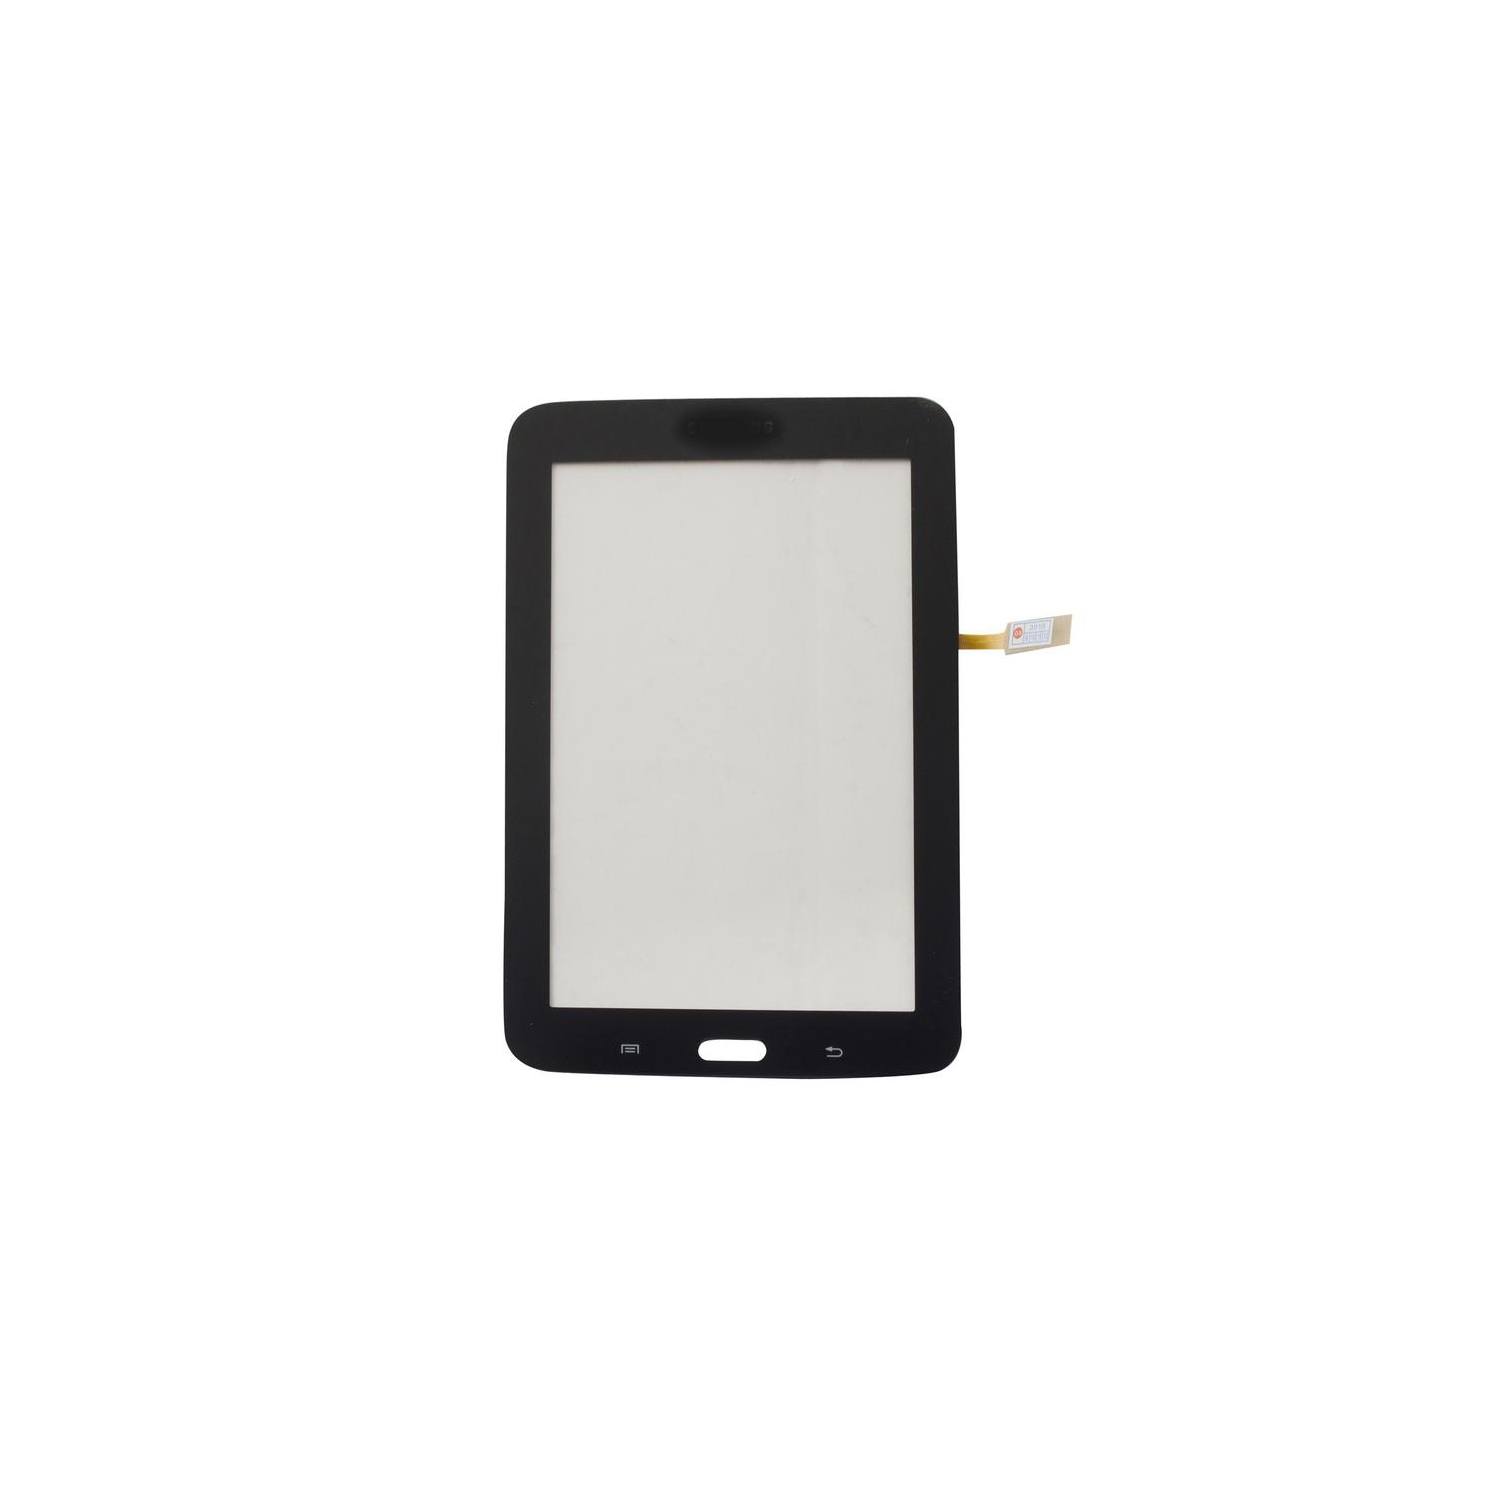 Samsung Galaxy Tab 3 Lite 7.0 SM-T110 Digitizer Touch Screen Replacement Part - Black